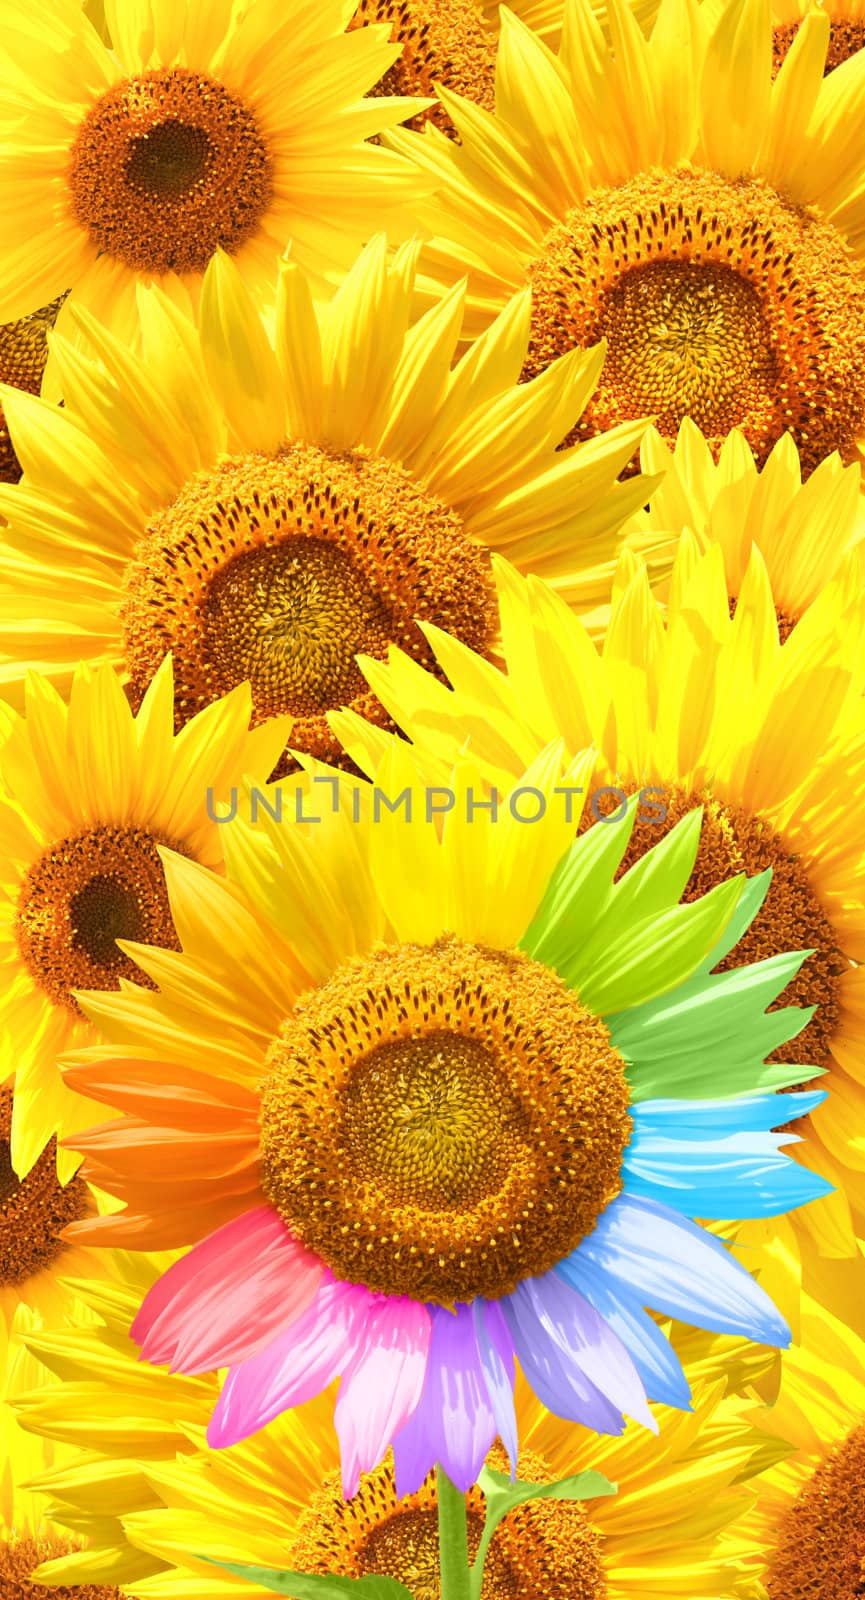 Sunflower painted in different colors by frenta